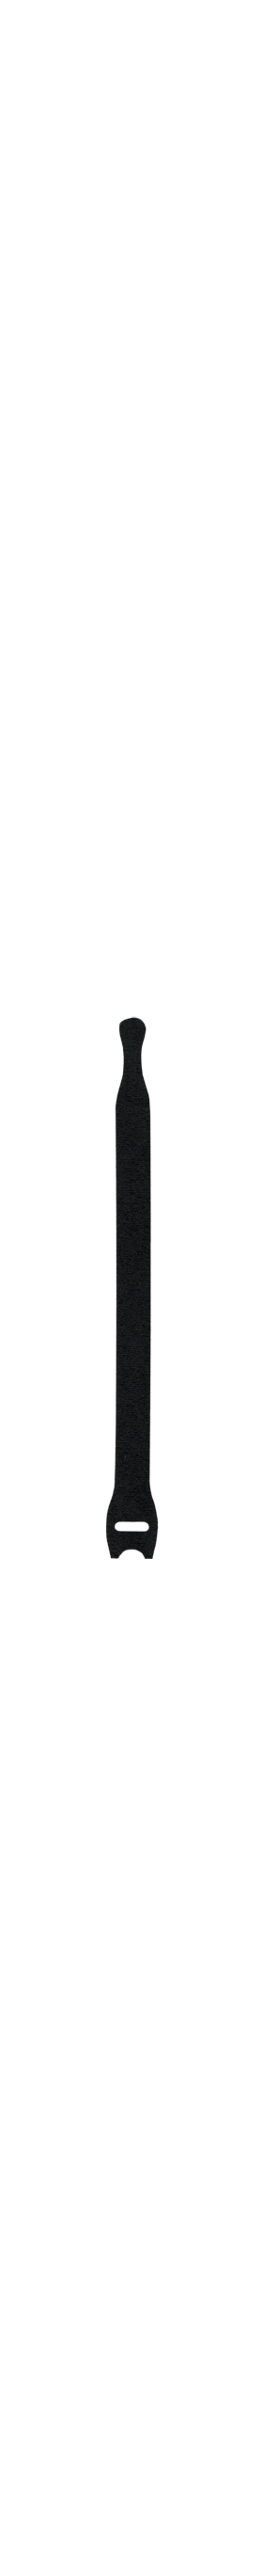 Velcro ONE-WRAP 900 Piece 3/4 x 8, Self Fastening Tie/Strap Hook & Loop  Strap Perforated/Pieces Roll, Black 170091 - 67128249